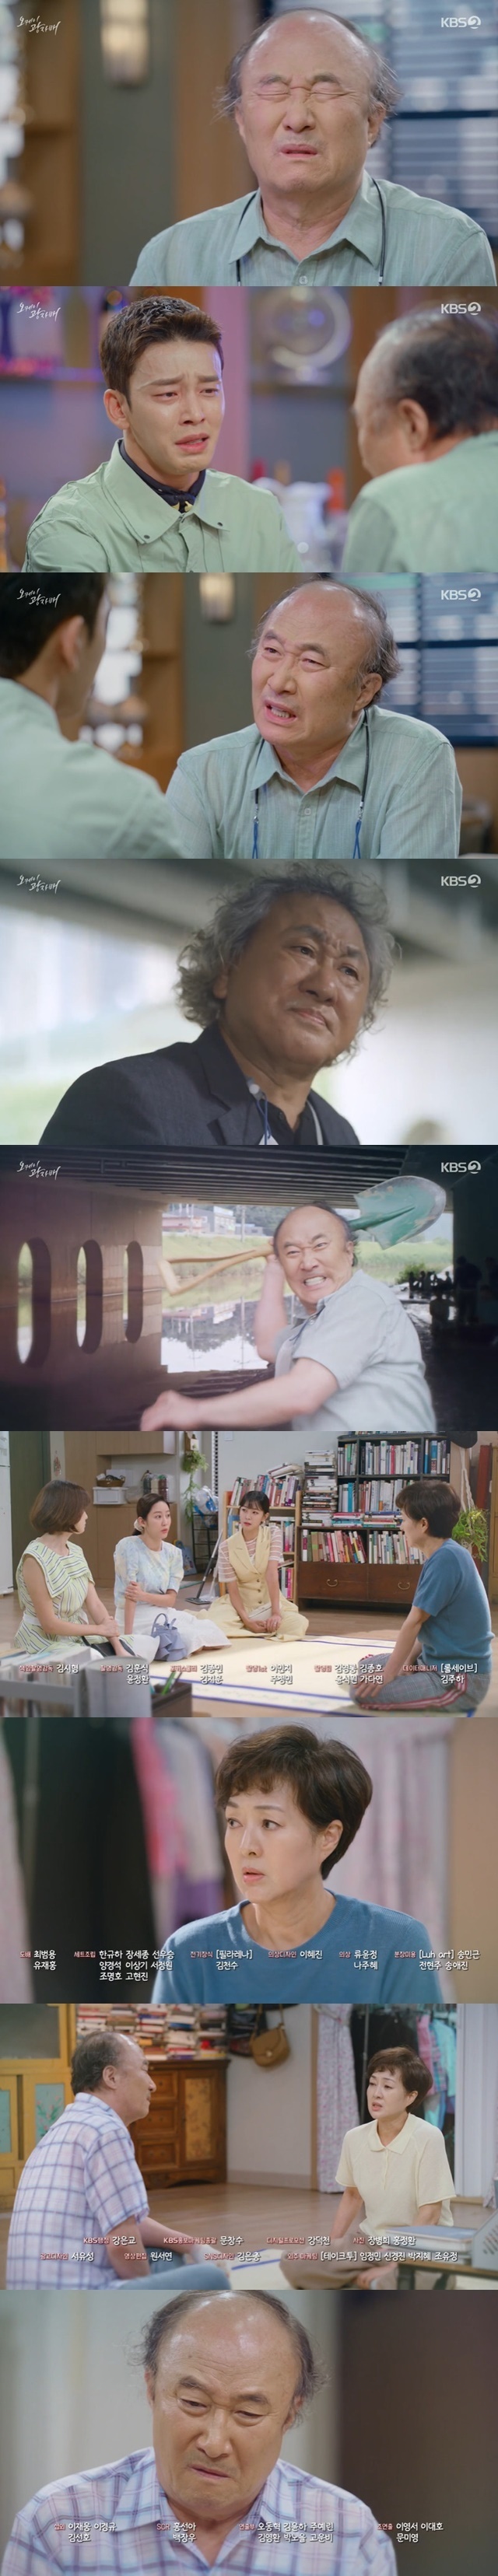 Jung Seung-hos identity was revealed as an affair, and the birth secrets of all three daughters of photons were suspected.Lee Cheol-soo (Yoon Joo-sang) showed his identity by angering Nachbum (Jeong Seung-ho) in the 45th episode of KBS 2TV weekend drama Okay Photosisters (playplay by Moon Young-nam/directed Lee Jin-seo) broadcast on August 29.On the day of the broadcast, Huh Gi-jin (Seok-hwan Seo) visited Lee Cheol-soo when Nachbum, who claims to be his wife Lee Kwang-tae (Kwon Won-hee), demanded money for a New Testament lie and refused, and went to his house to commit atrocities that broke the window.Heo Gi-jin was trying to talk to his father-in-law Lee Chul-soo because his wife Lee Kwang-tae was early in pregnancy.Lee said, What do you mean, a mad father? And Hung Gi-jin said, I didnt believe it at first. But I did a genetic test. Is it true?Lee said, Do you know our madness?Did you tell your brother? He said, Lets just know this and move on.After that, Hugijin said, When I was a child, I left the gwangtae for a while, but when I went to find it, I could not give it to me.When he told Nachbum that he had to write a heart disease New Testament, he said, I gave you 2,000, but I ask you 100 million. Lee Chul-soo was angry, saying, This is rotten.Heart disease was a lie, and I think it was gambling. I wanted to solve it alone, but I couldnt handle it. It was too hard.Im intimidated, how much trouble did a young man have to have been in trouble because he was intimidated, Lee said, Im sorry. I should have solved it.Dont worry, I know.Lee then went to Nach with a shovel and said, Today you die and I die. I did not kill you.Ive never forgotten the disgrace and disgrace you gave me. Youre gonna ruin my life and now youre gonna fuck your kids? I dont think so.It is not not! Nachbum ran away from Mt.Lee Cheol-soos words revealed that Nachs identity was revealed as an affair of Lee Chul-soos wife.In the trailer, Oh Bong-ja (Lee Bo-hee) was shocked by the picture, saying, Now tell the truth to Gwang-tae, and I am worried that Gwang-sik and Gwang-nam will be affected by this.